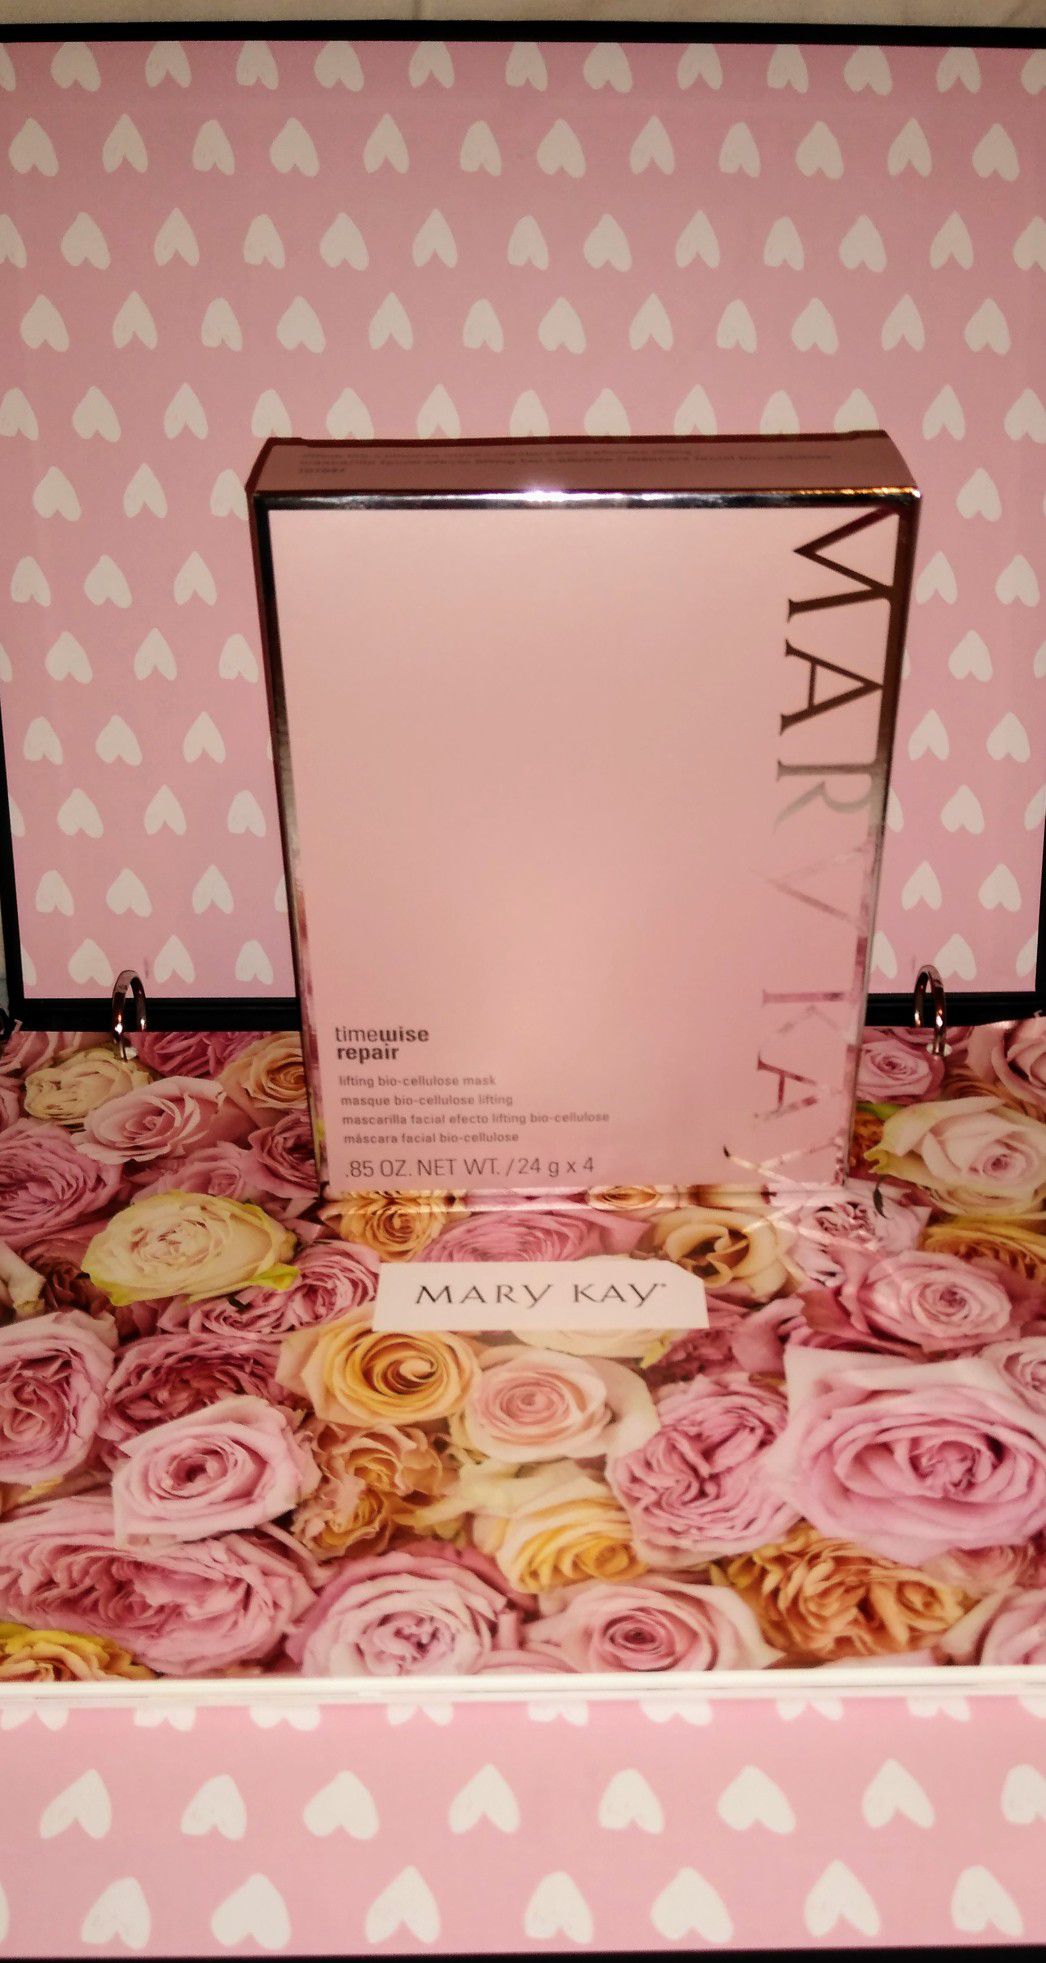 Mary Kay/ time wise repair